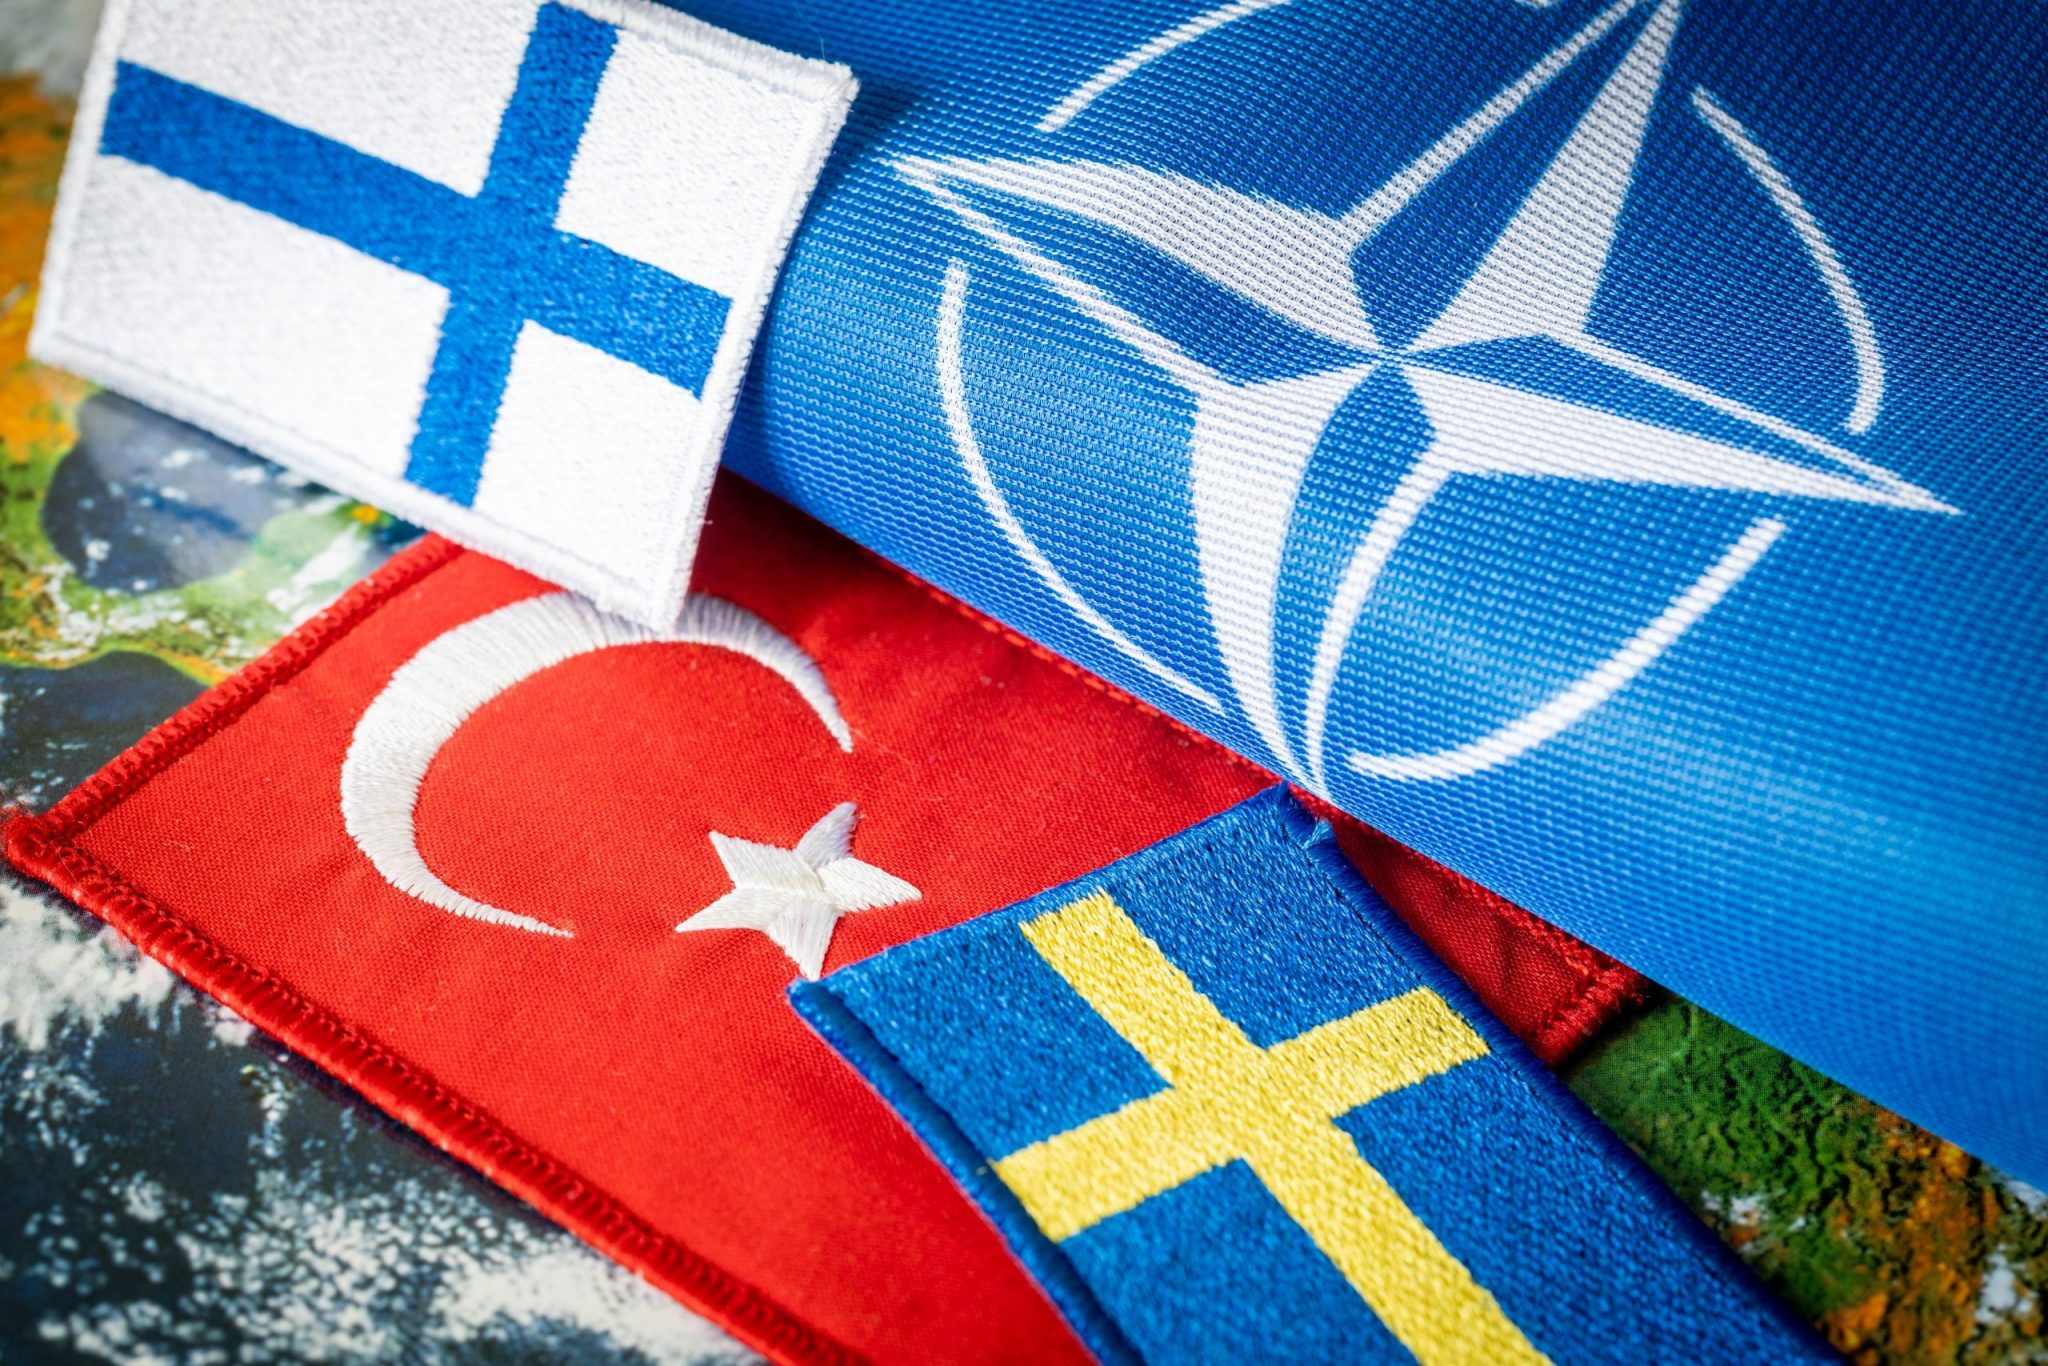 15, May, 2022, Turkish flag next to the flags of Finland and Sweden Concept of a political conflict between a member of the North Atlantic Pact and candidates aspiring to join NATO